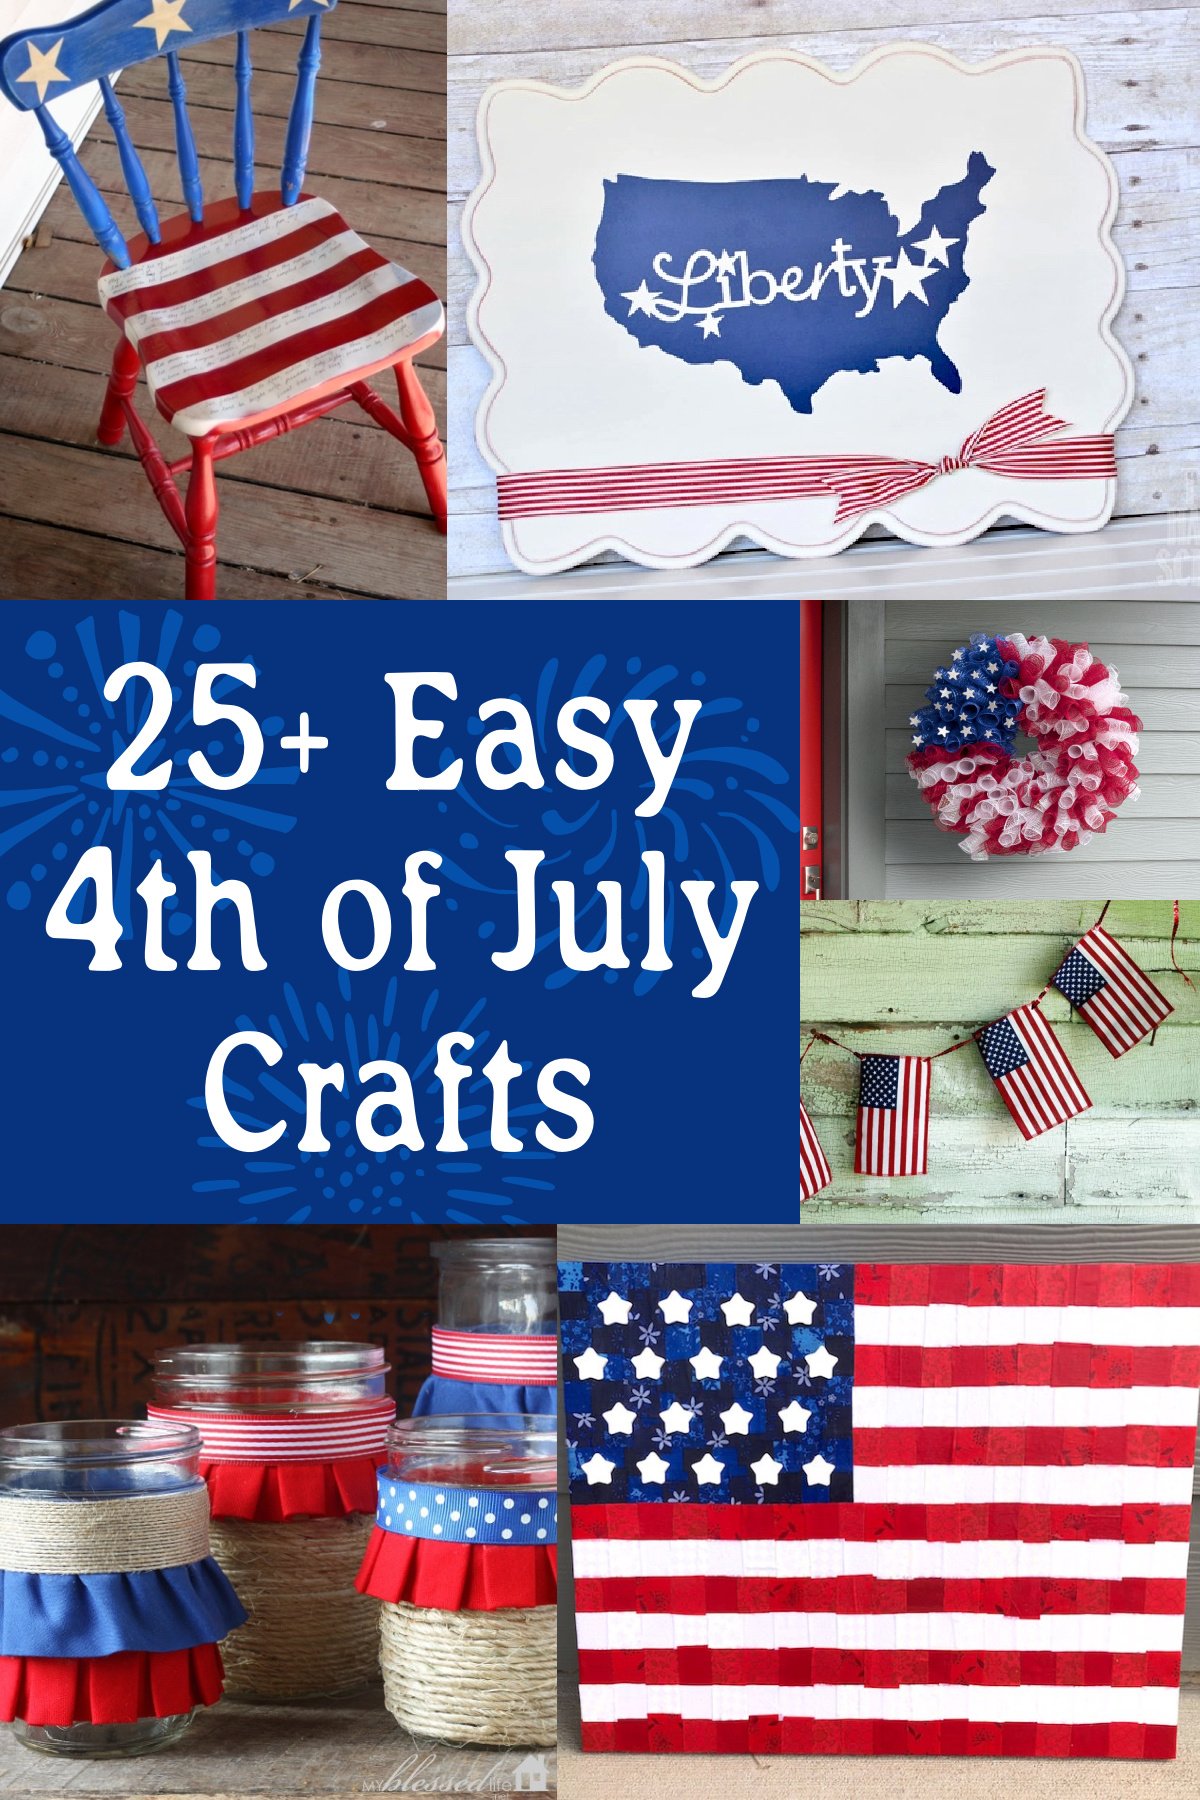 4th of July crafts for decor